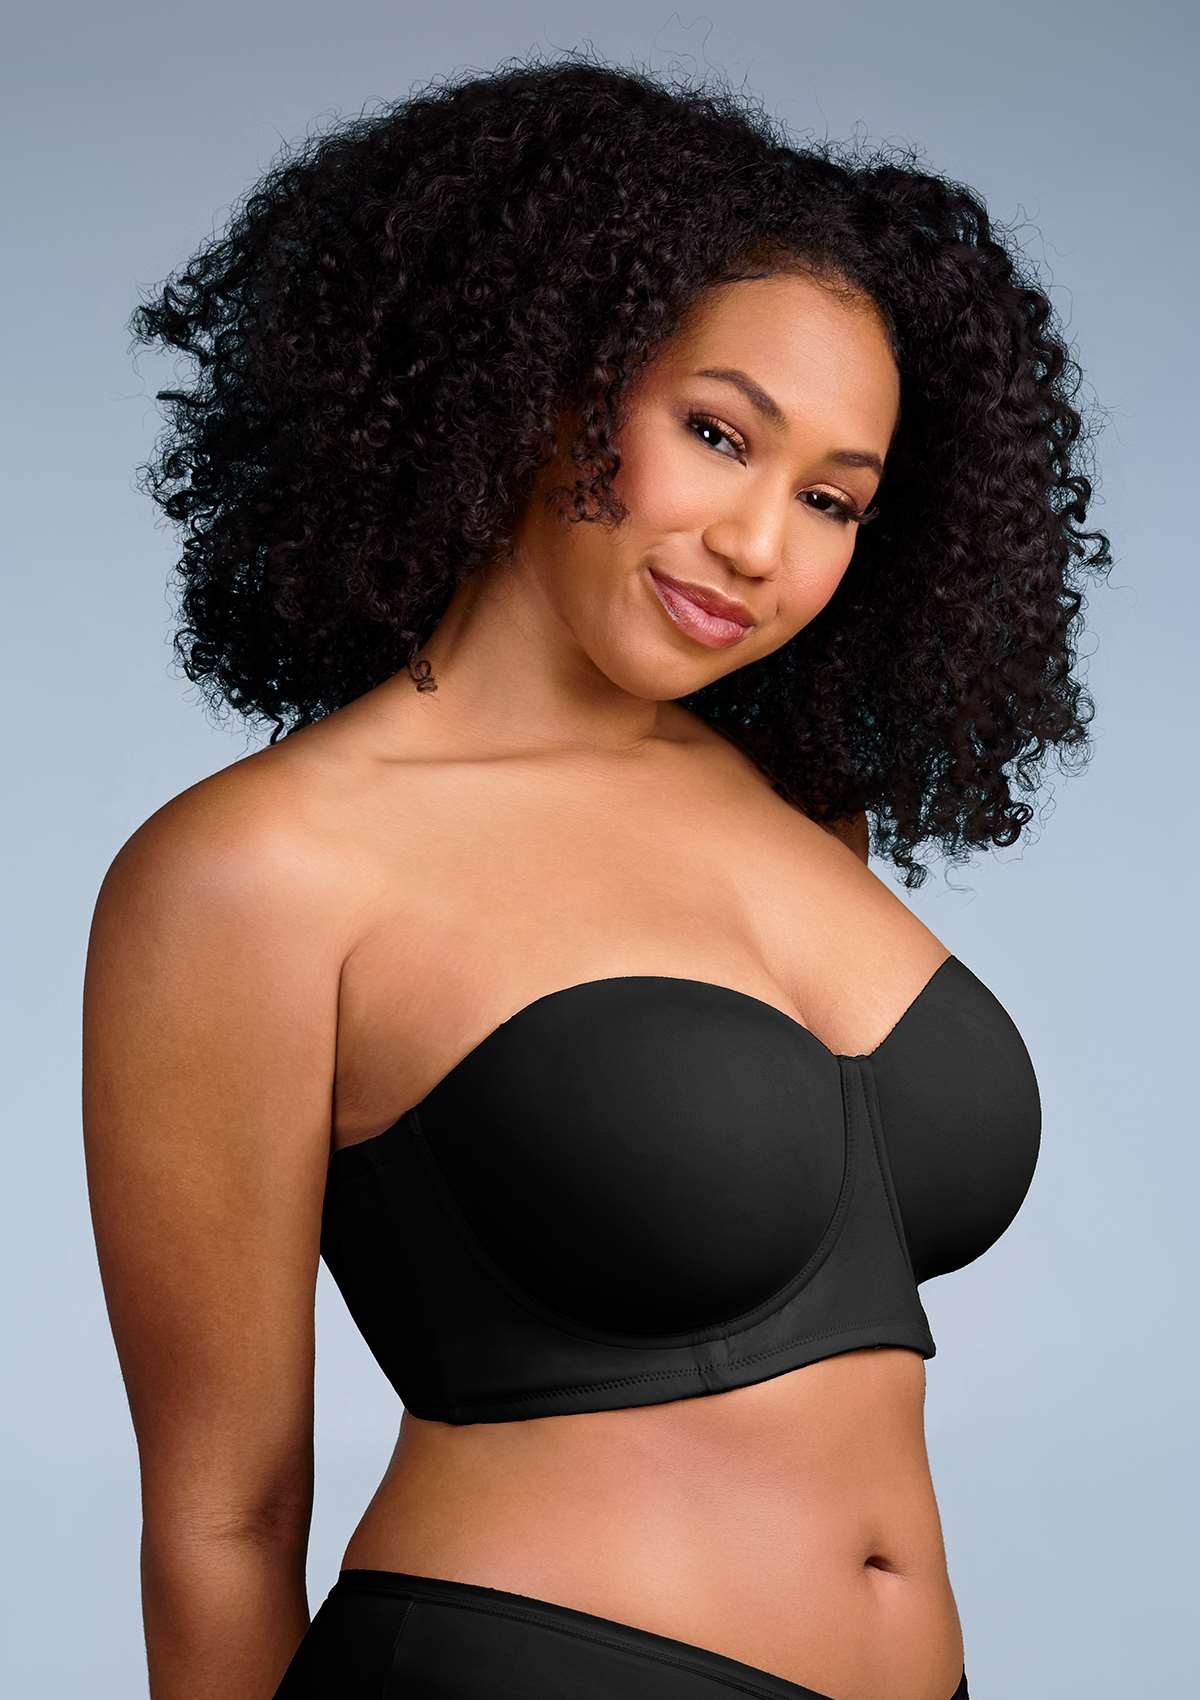 HSIA Margaret Molded Convertible Multiway Classic Strapless Bra - Black / 34 / D